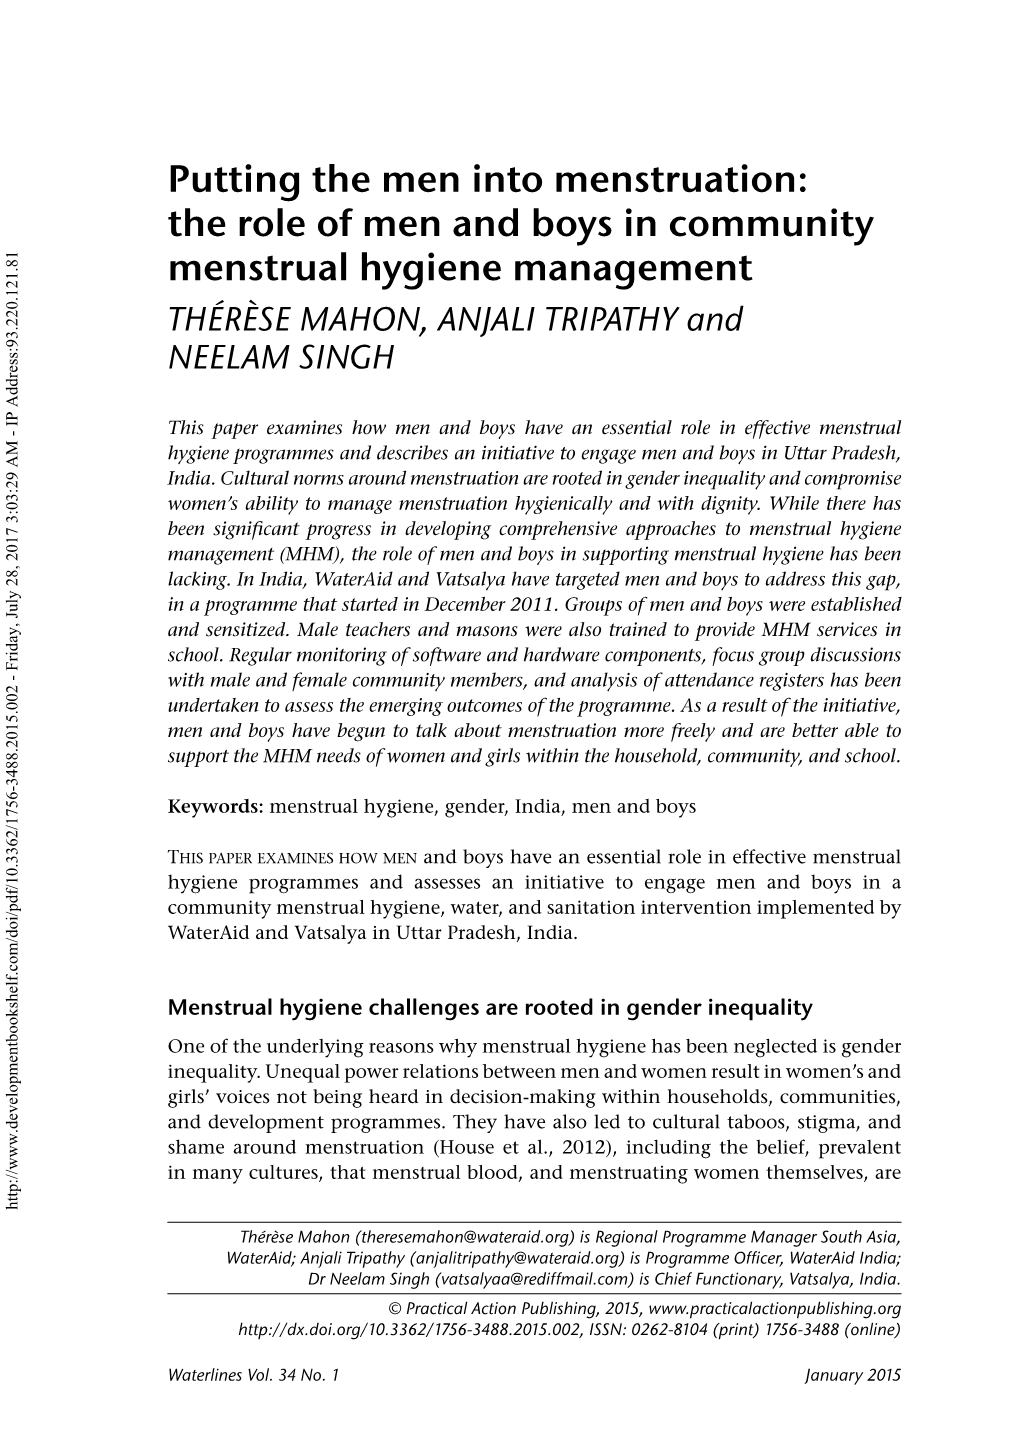 Putting the Men Into Menstruation: the Role of Men and Boys in Community Menstrual Hygiene Management THÉRÈSE MAHON, ANJALI TRIPATHY and NEELAM SINGH